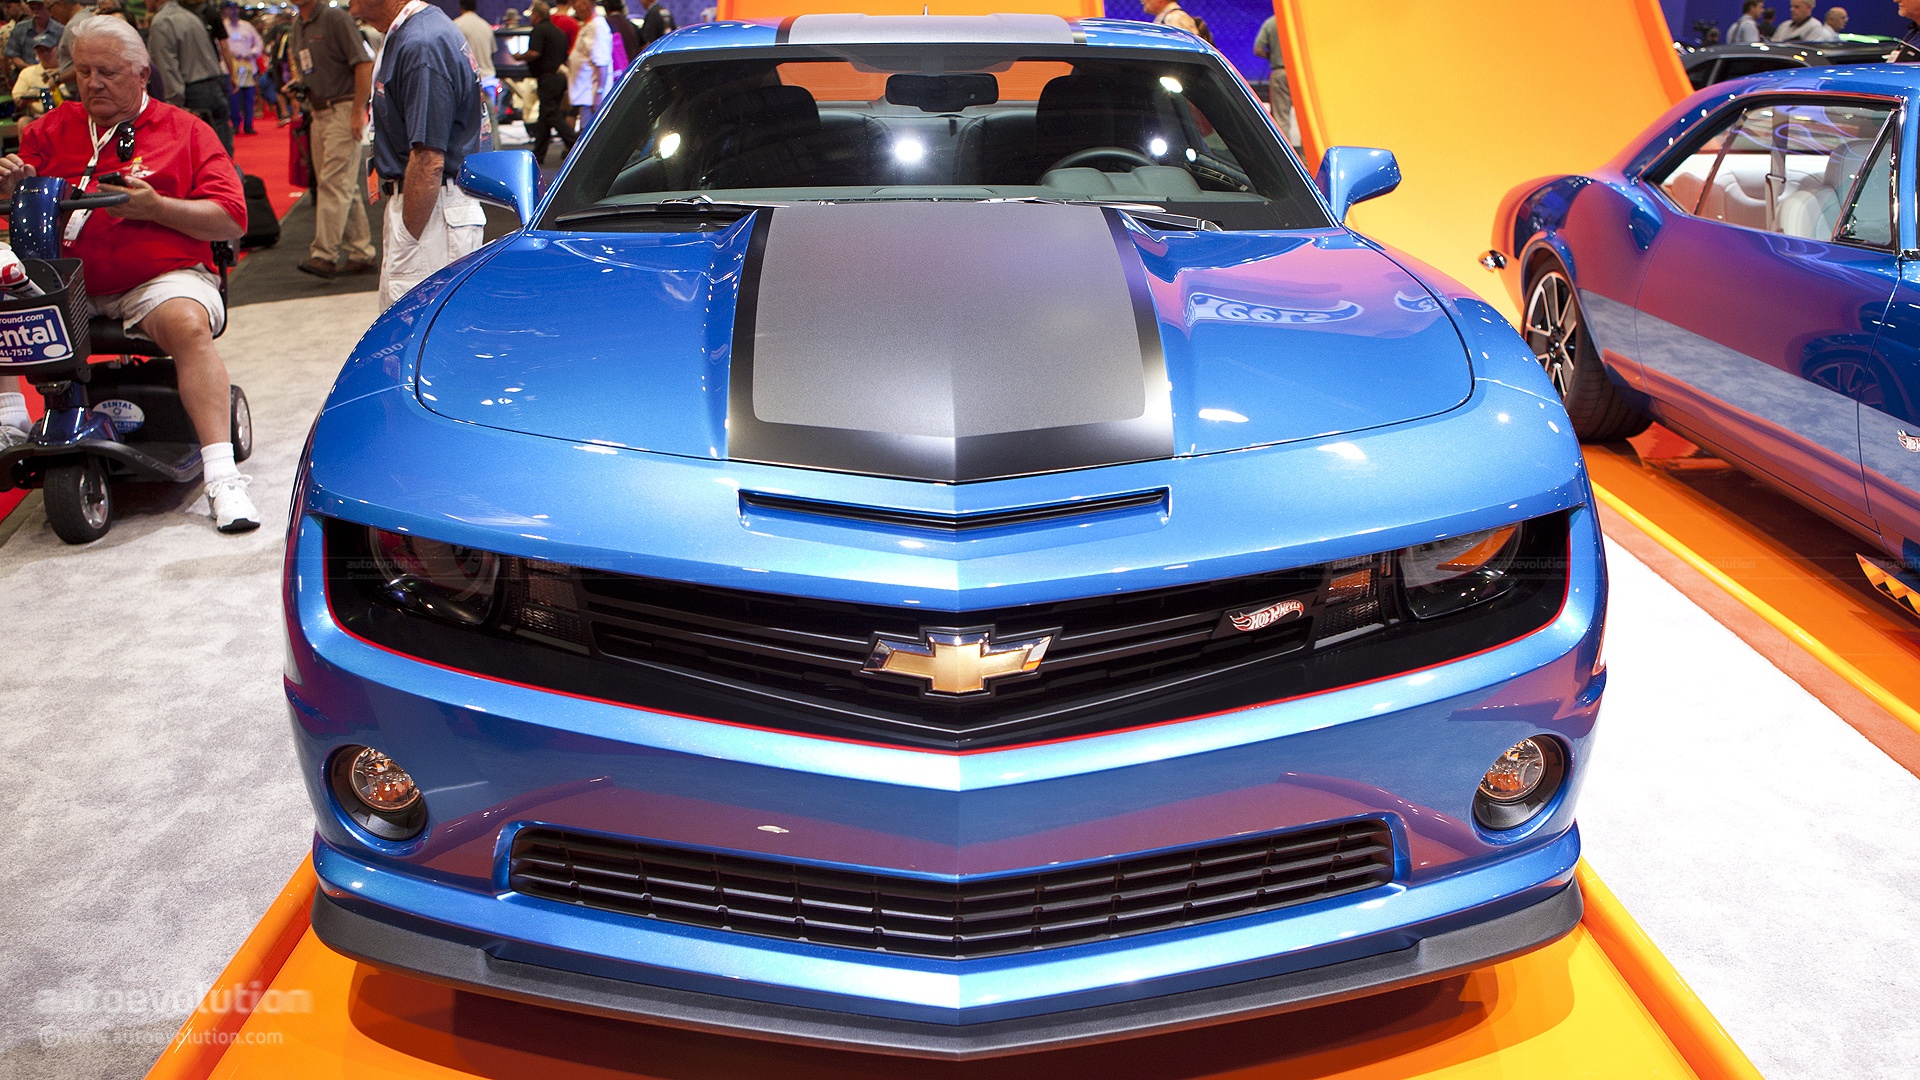 Chevrolet Camaro Hot Wheels Edition Launched in Britain.